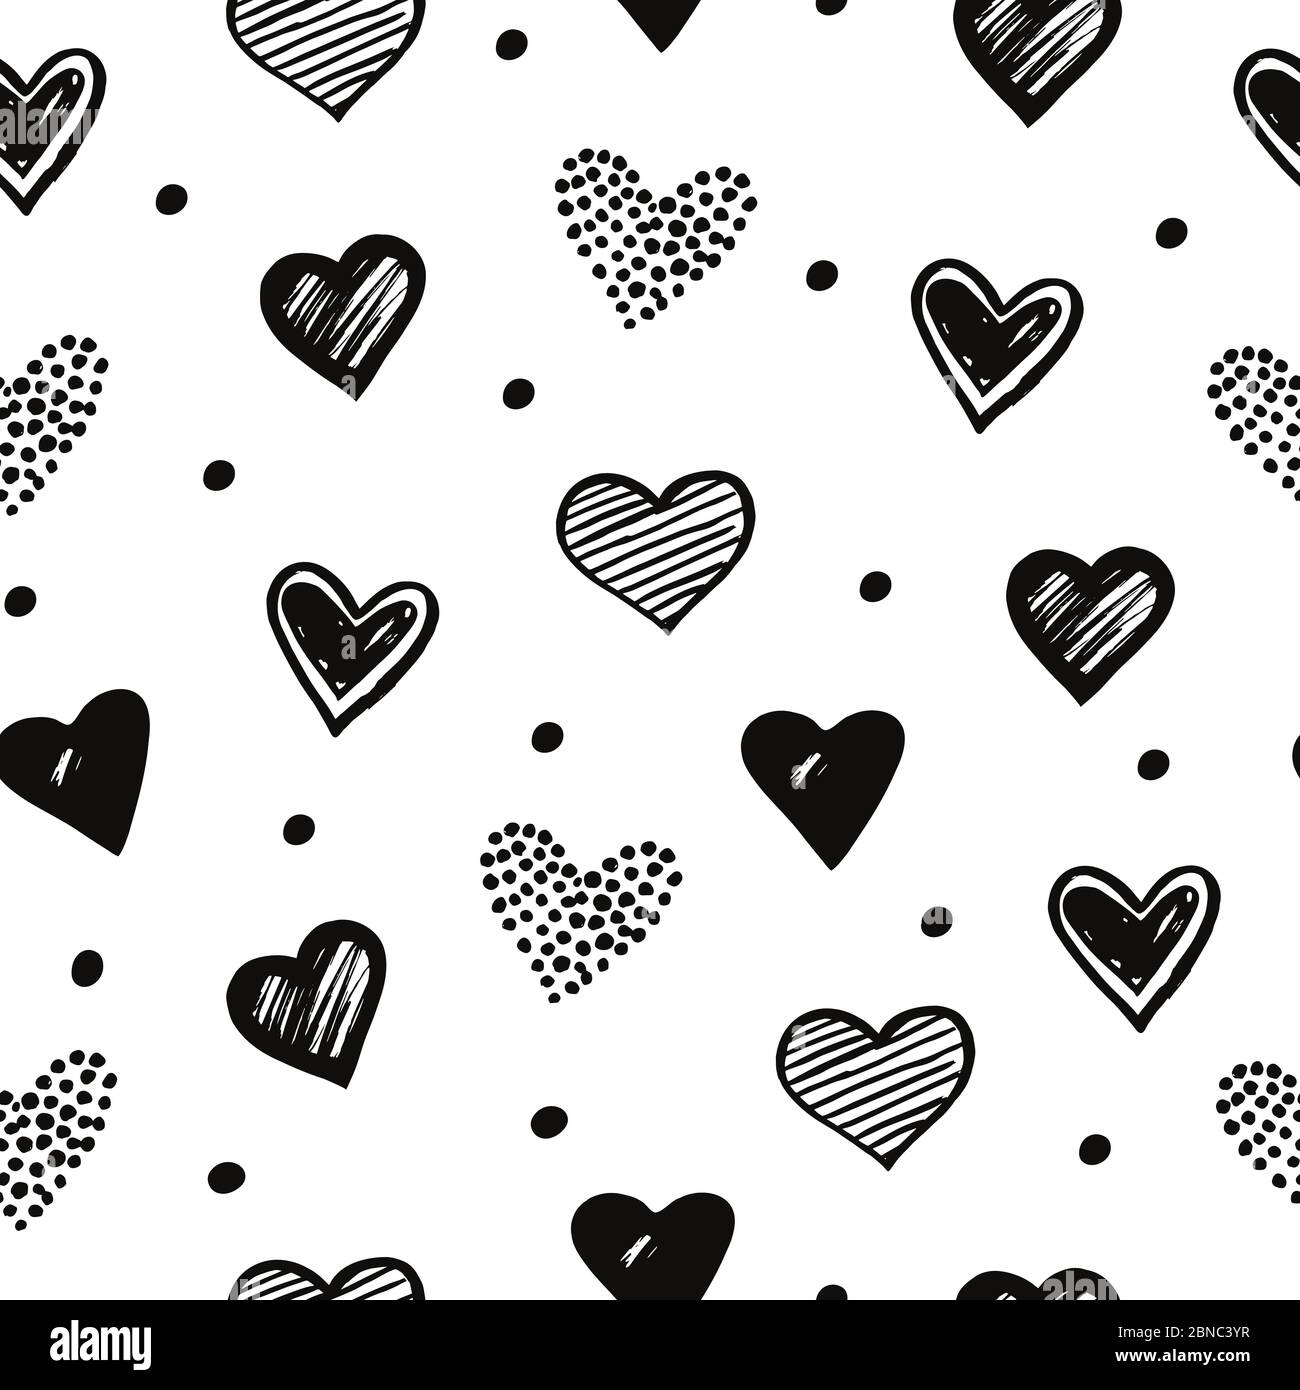 Sketch hearts seamless pattern. Romantic doodle love valentines day ...